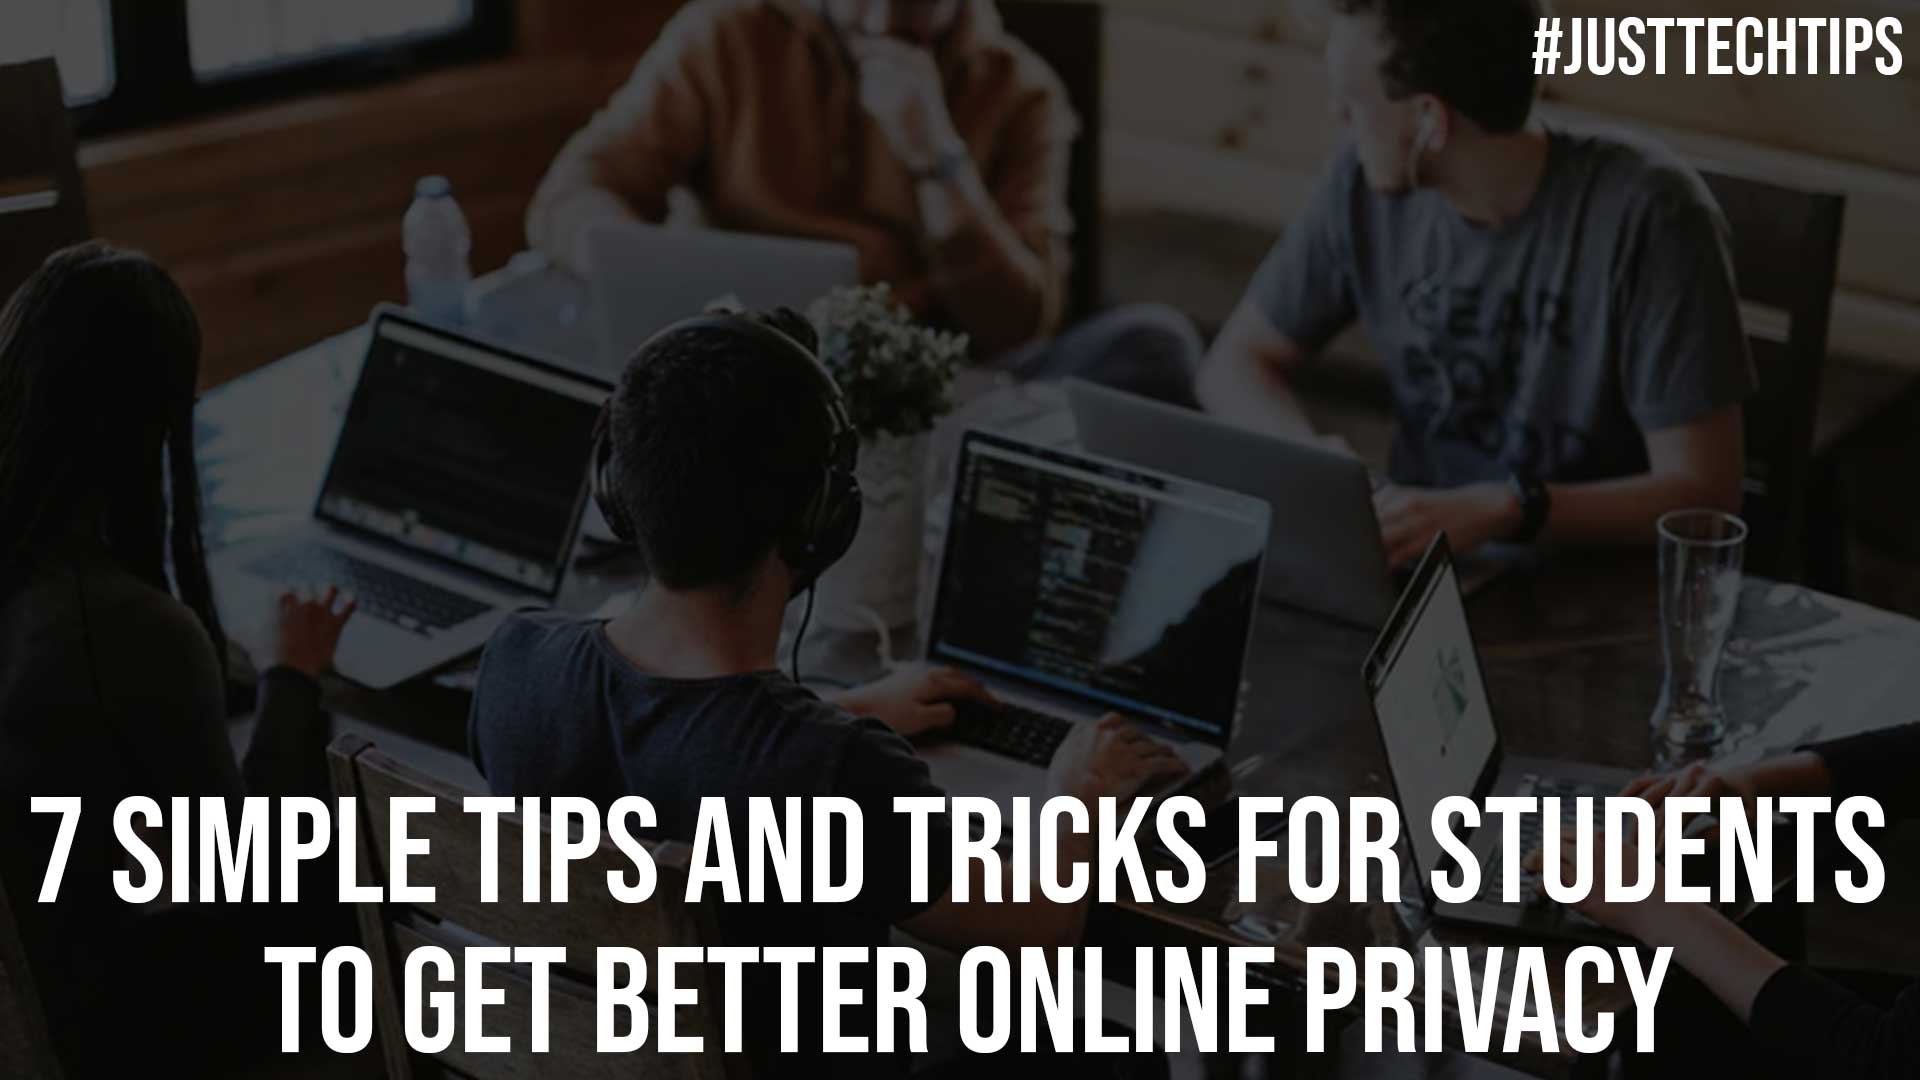 7 Simple Tips and Tricks for Students to Get Better Online Privacy